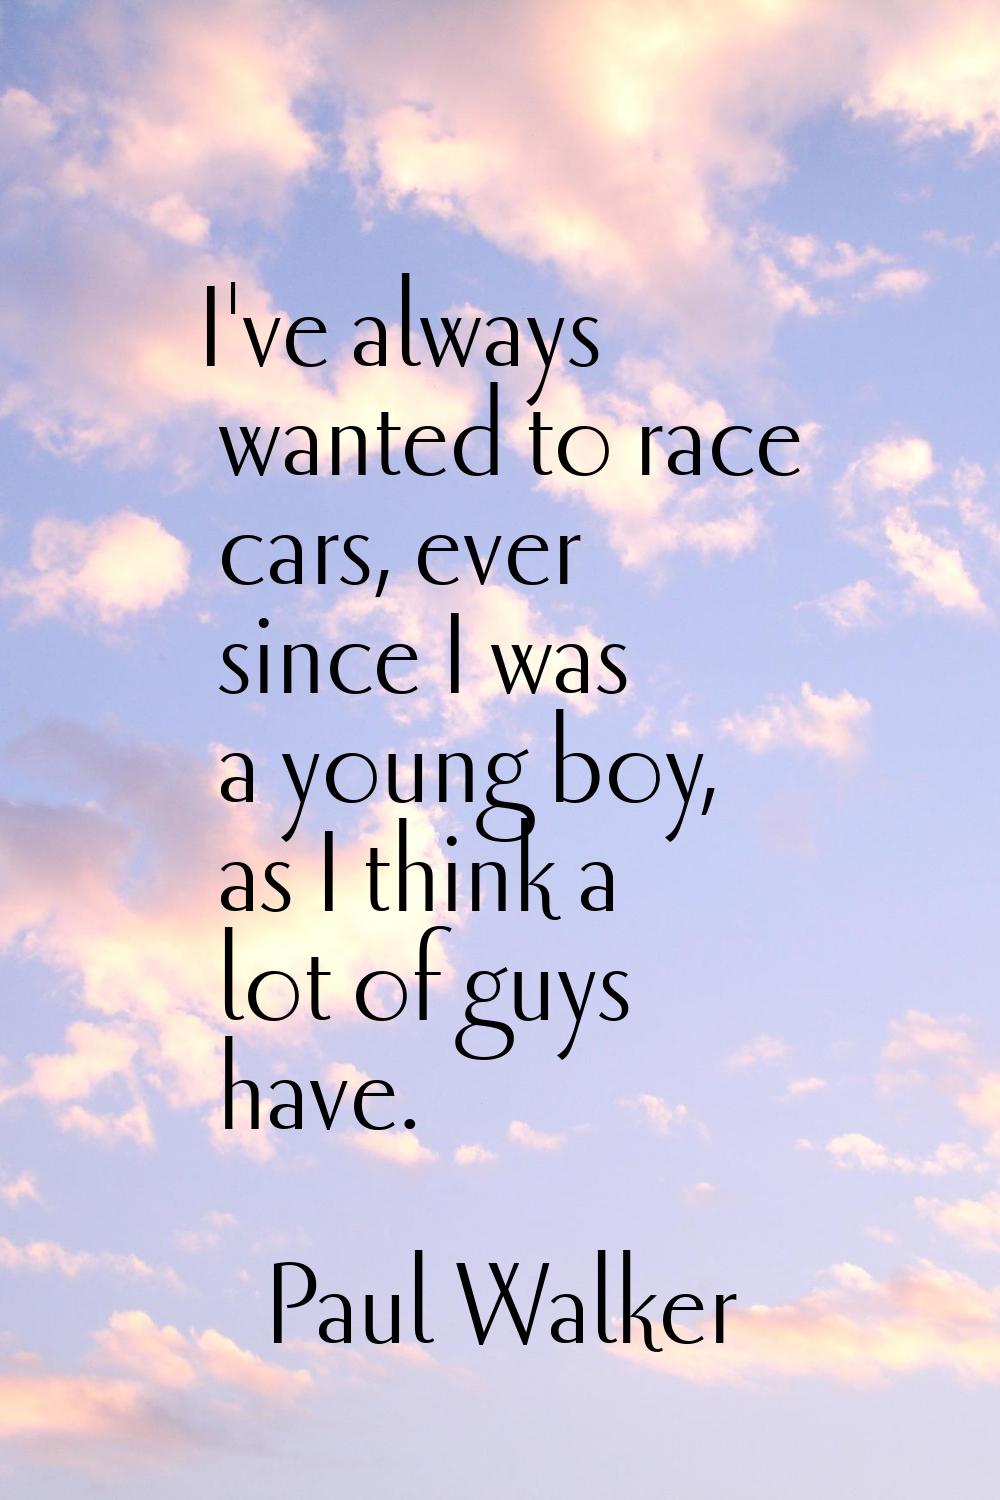 I've always wanted to race cars, ever since I was a young boy, as I think a lot of guys have.